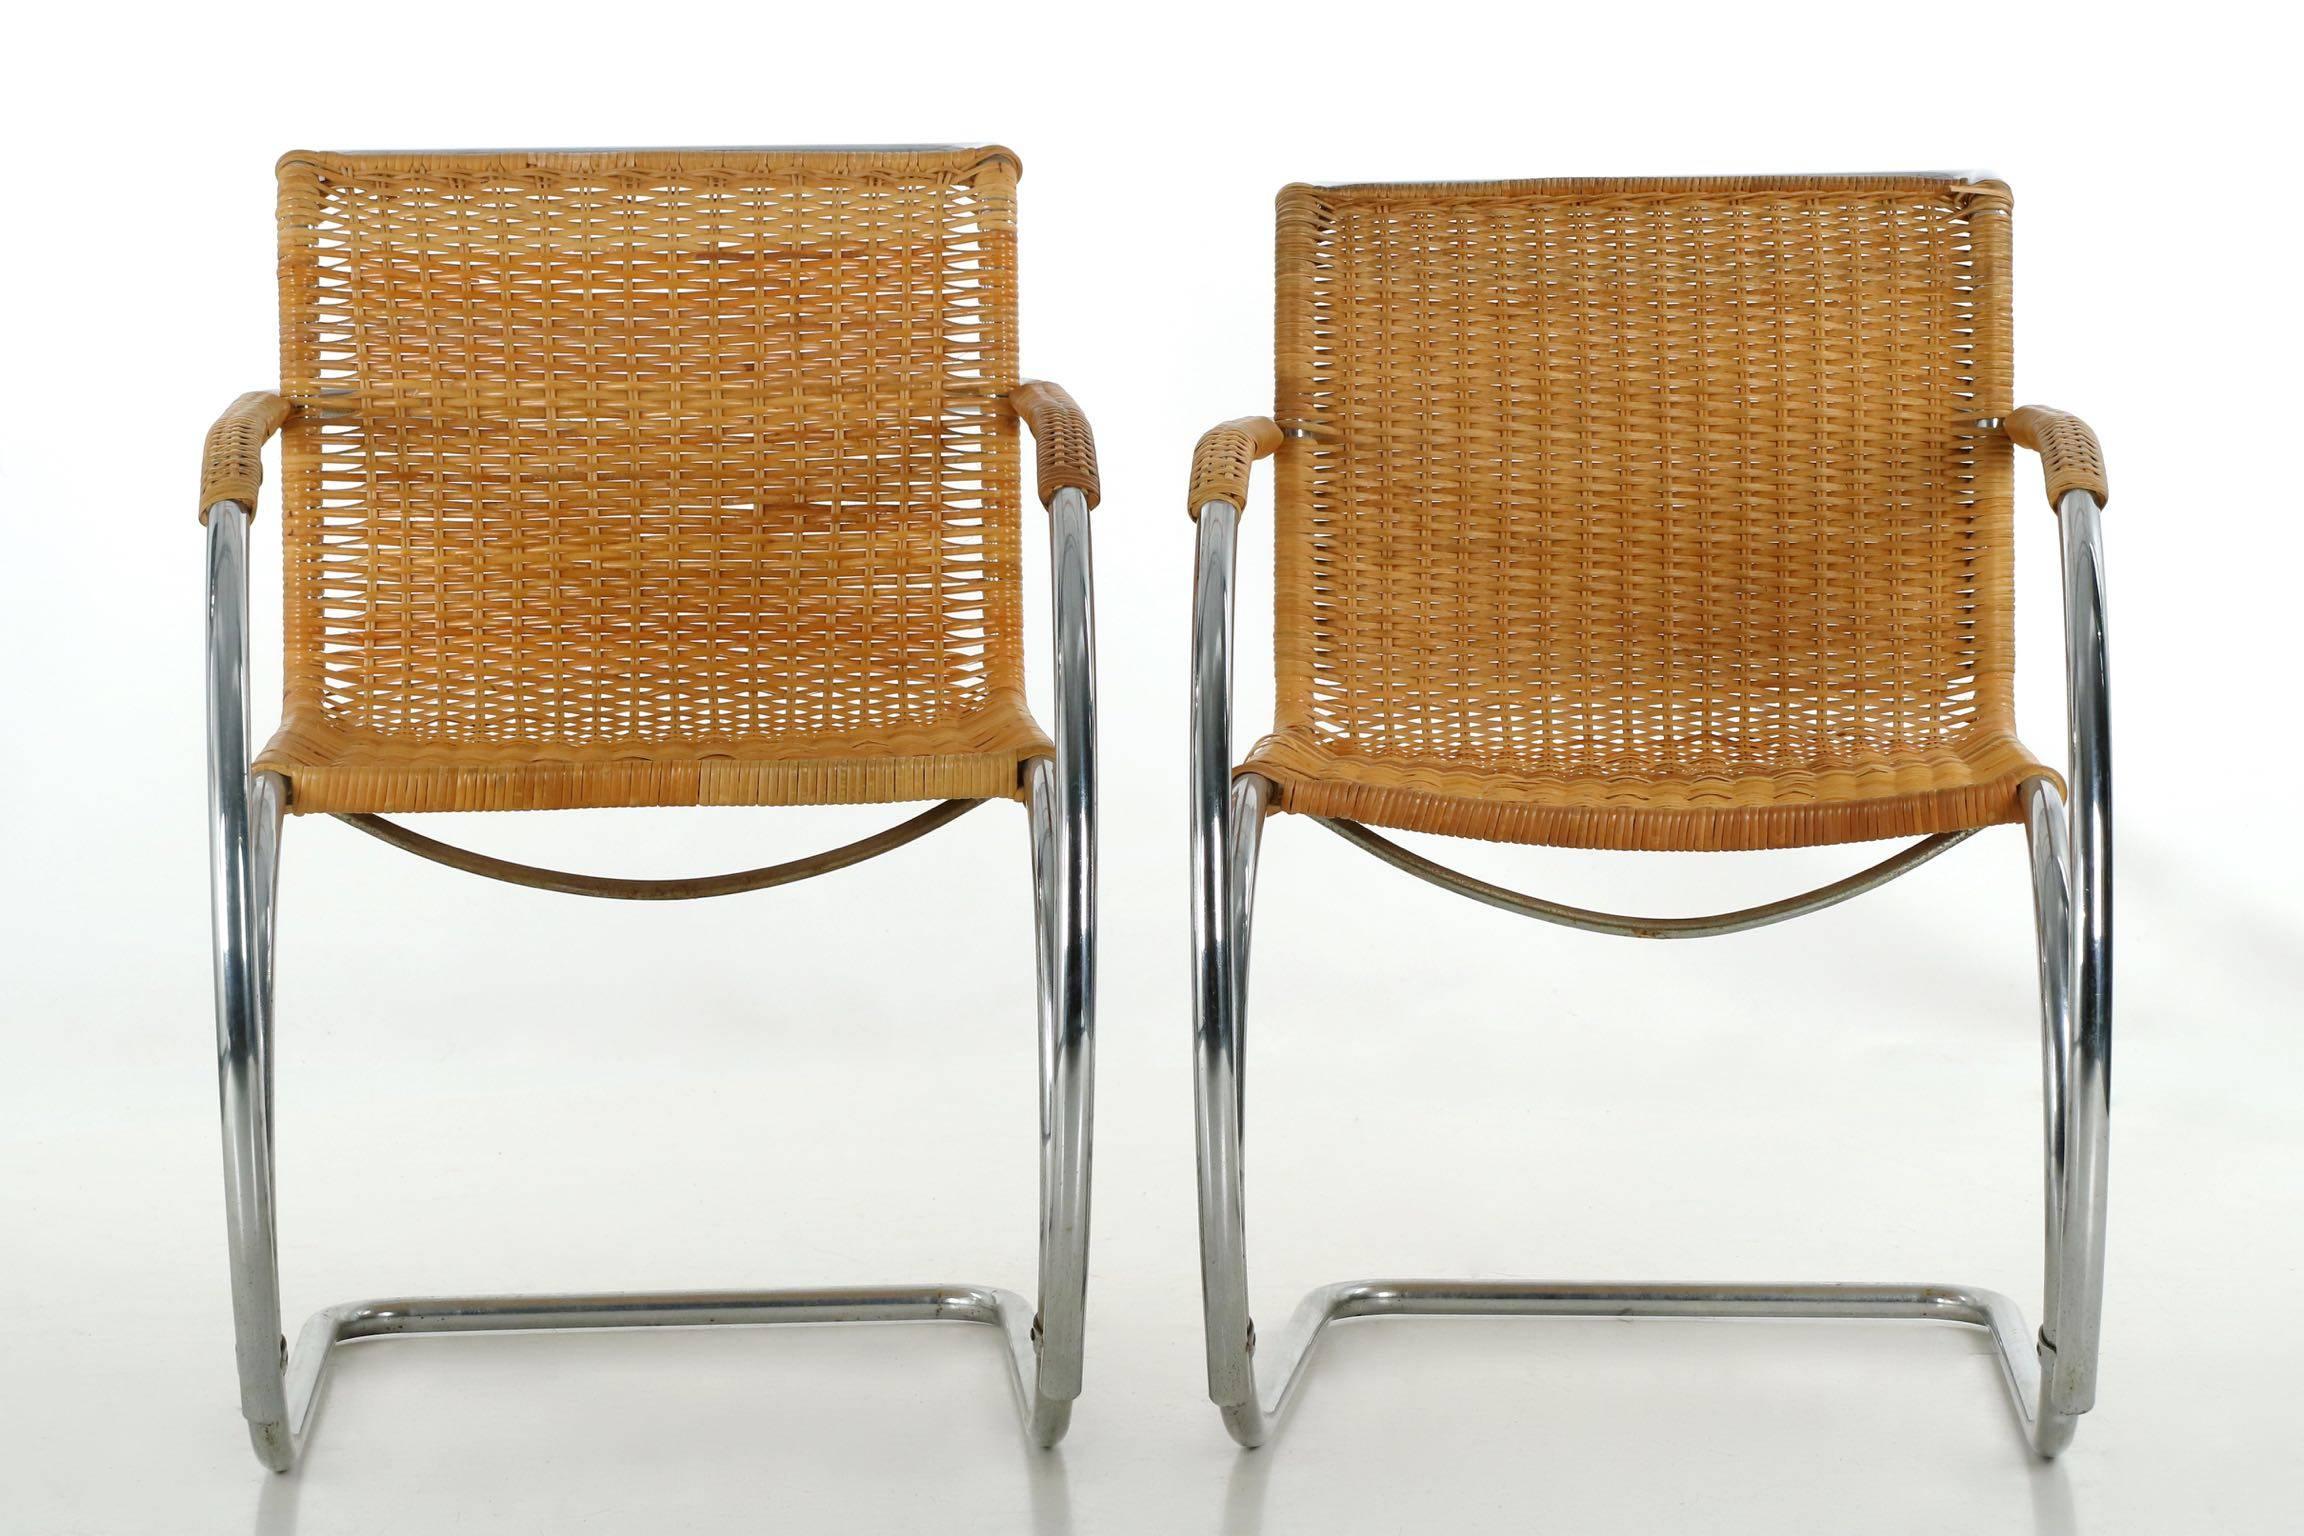 This striking pair of MR20 chairs by Mies van der Rohe were executed by Stendig in the 1960s, one chair still retaining the original paper label on the stretcher bar. Both retain their original caning with it’s worn patina, still absolutely